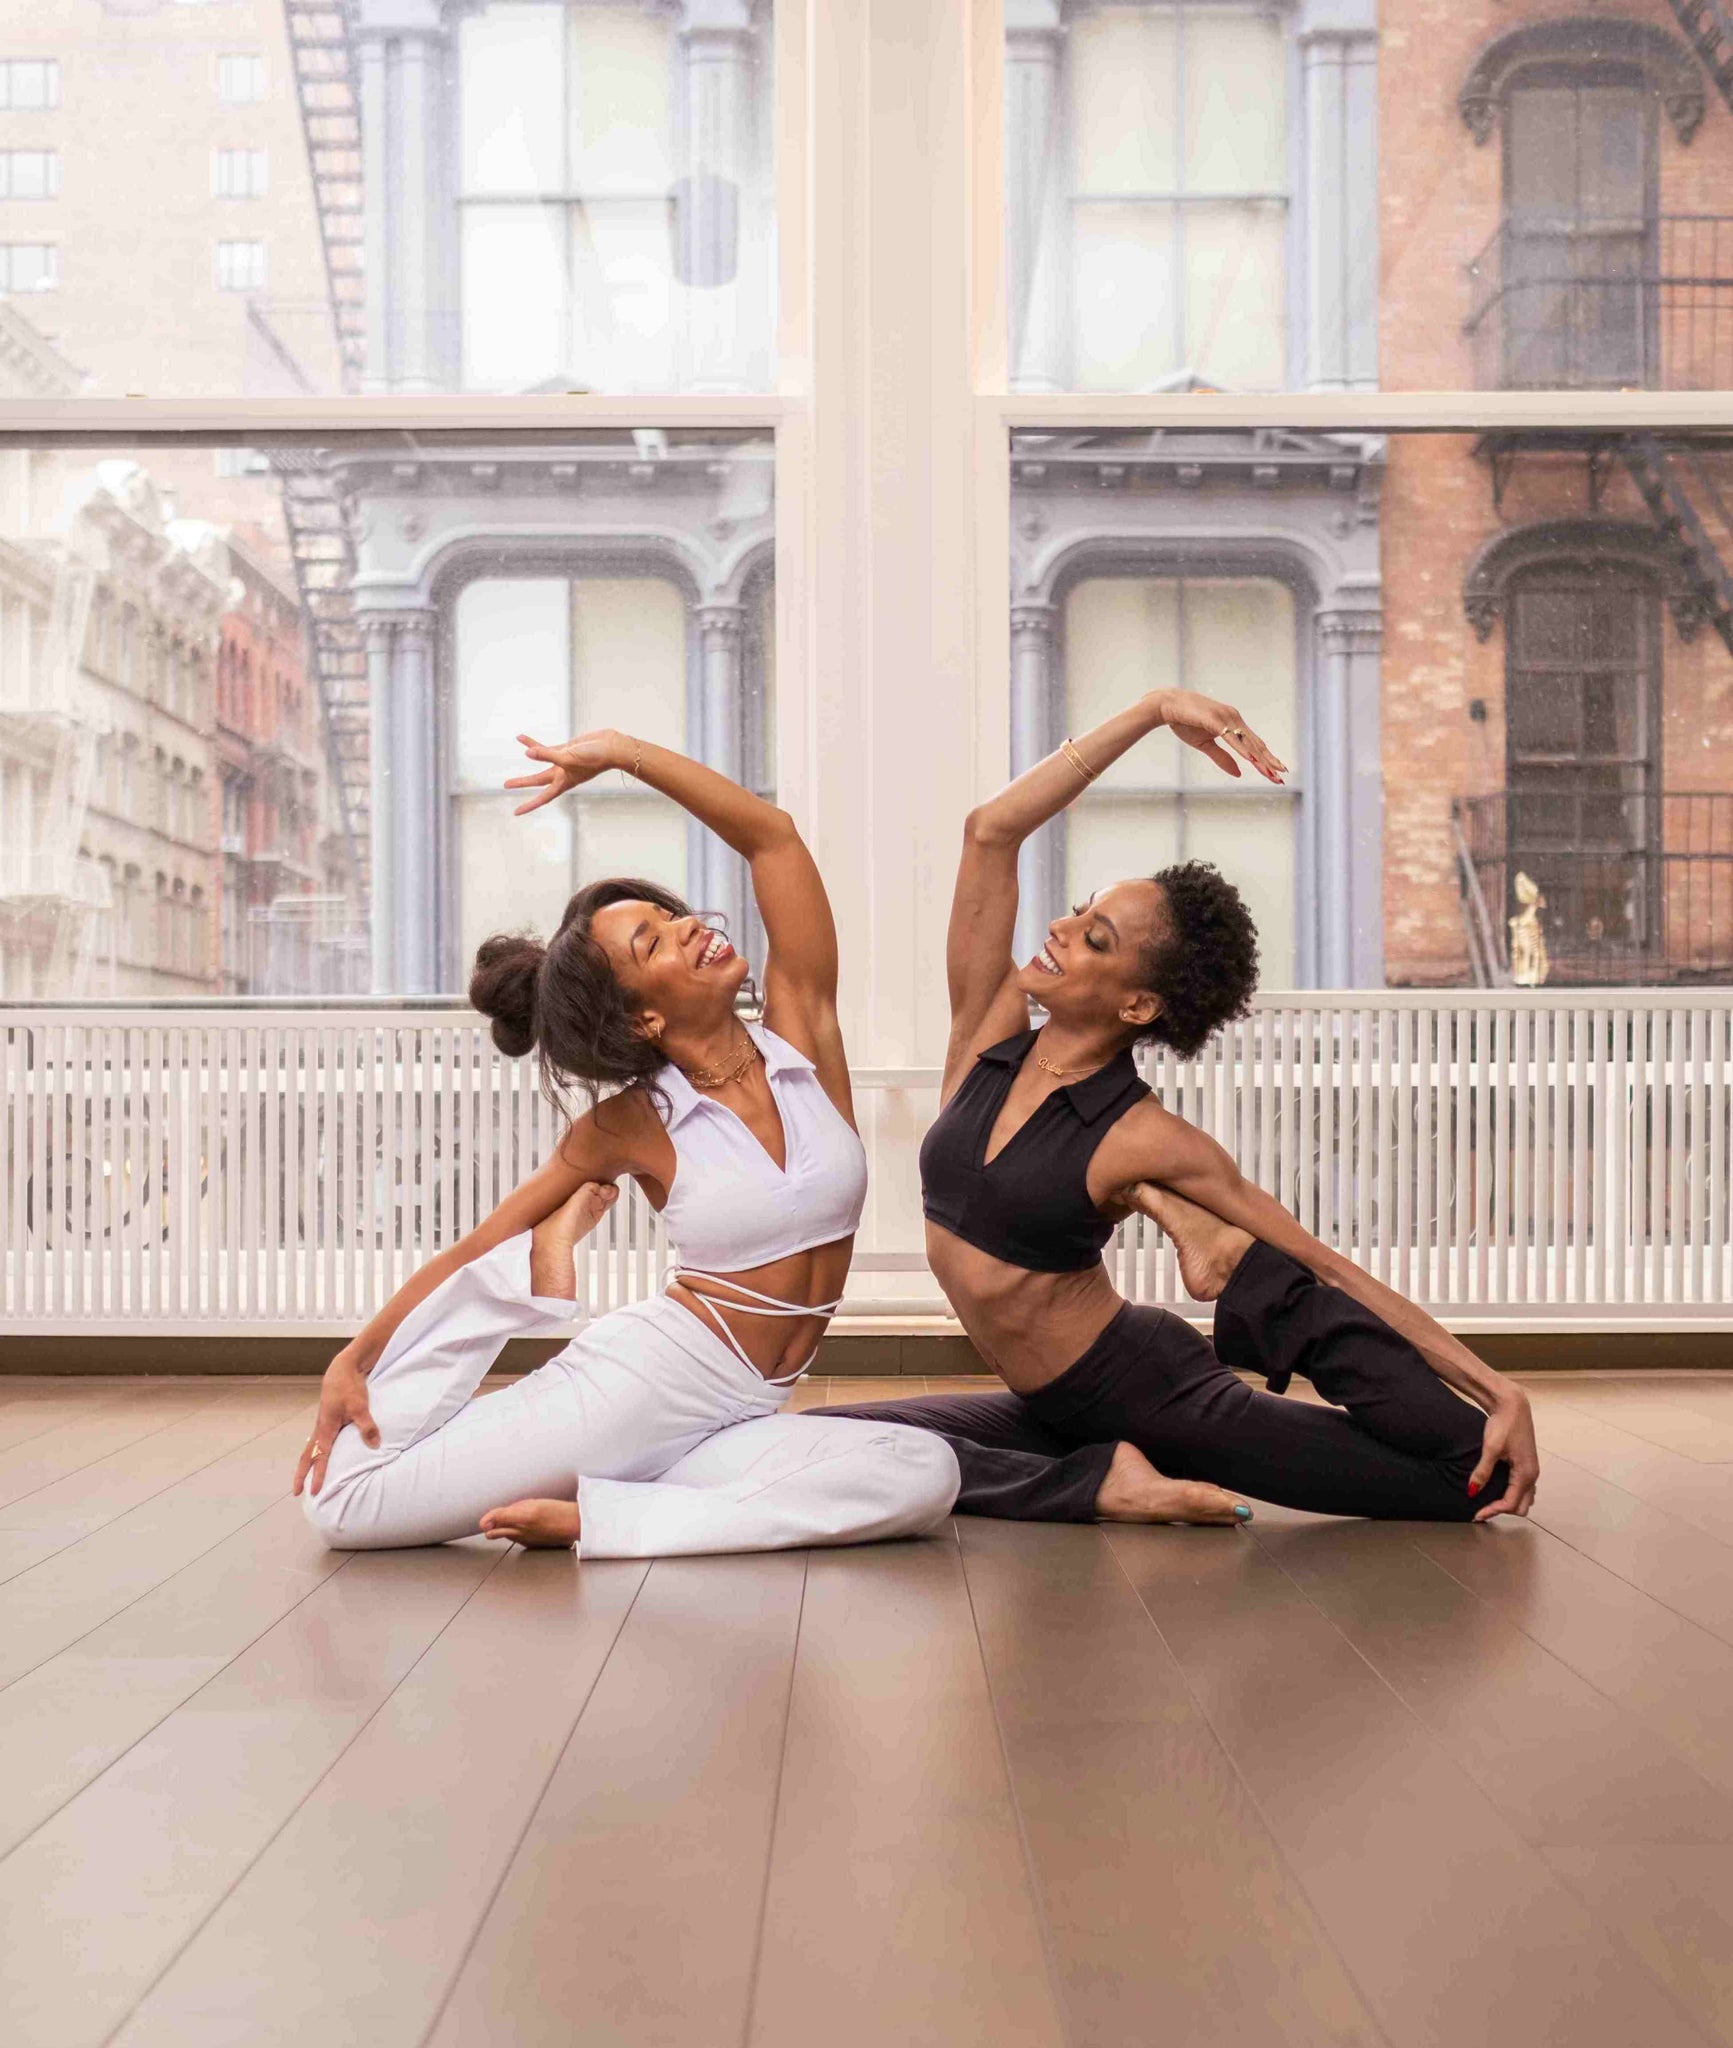 Alo Yoga - Flatiron, NY, Gallery posted by beccawise